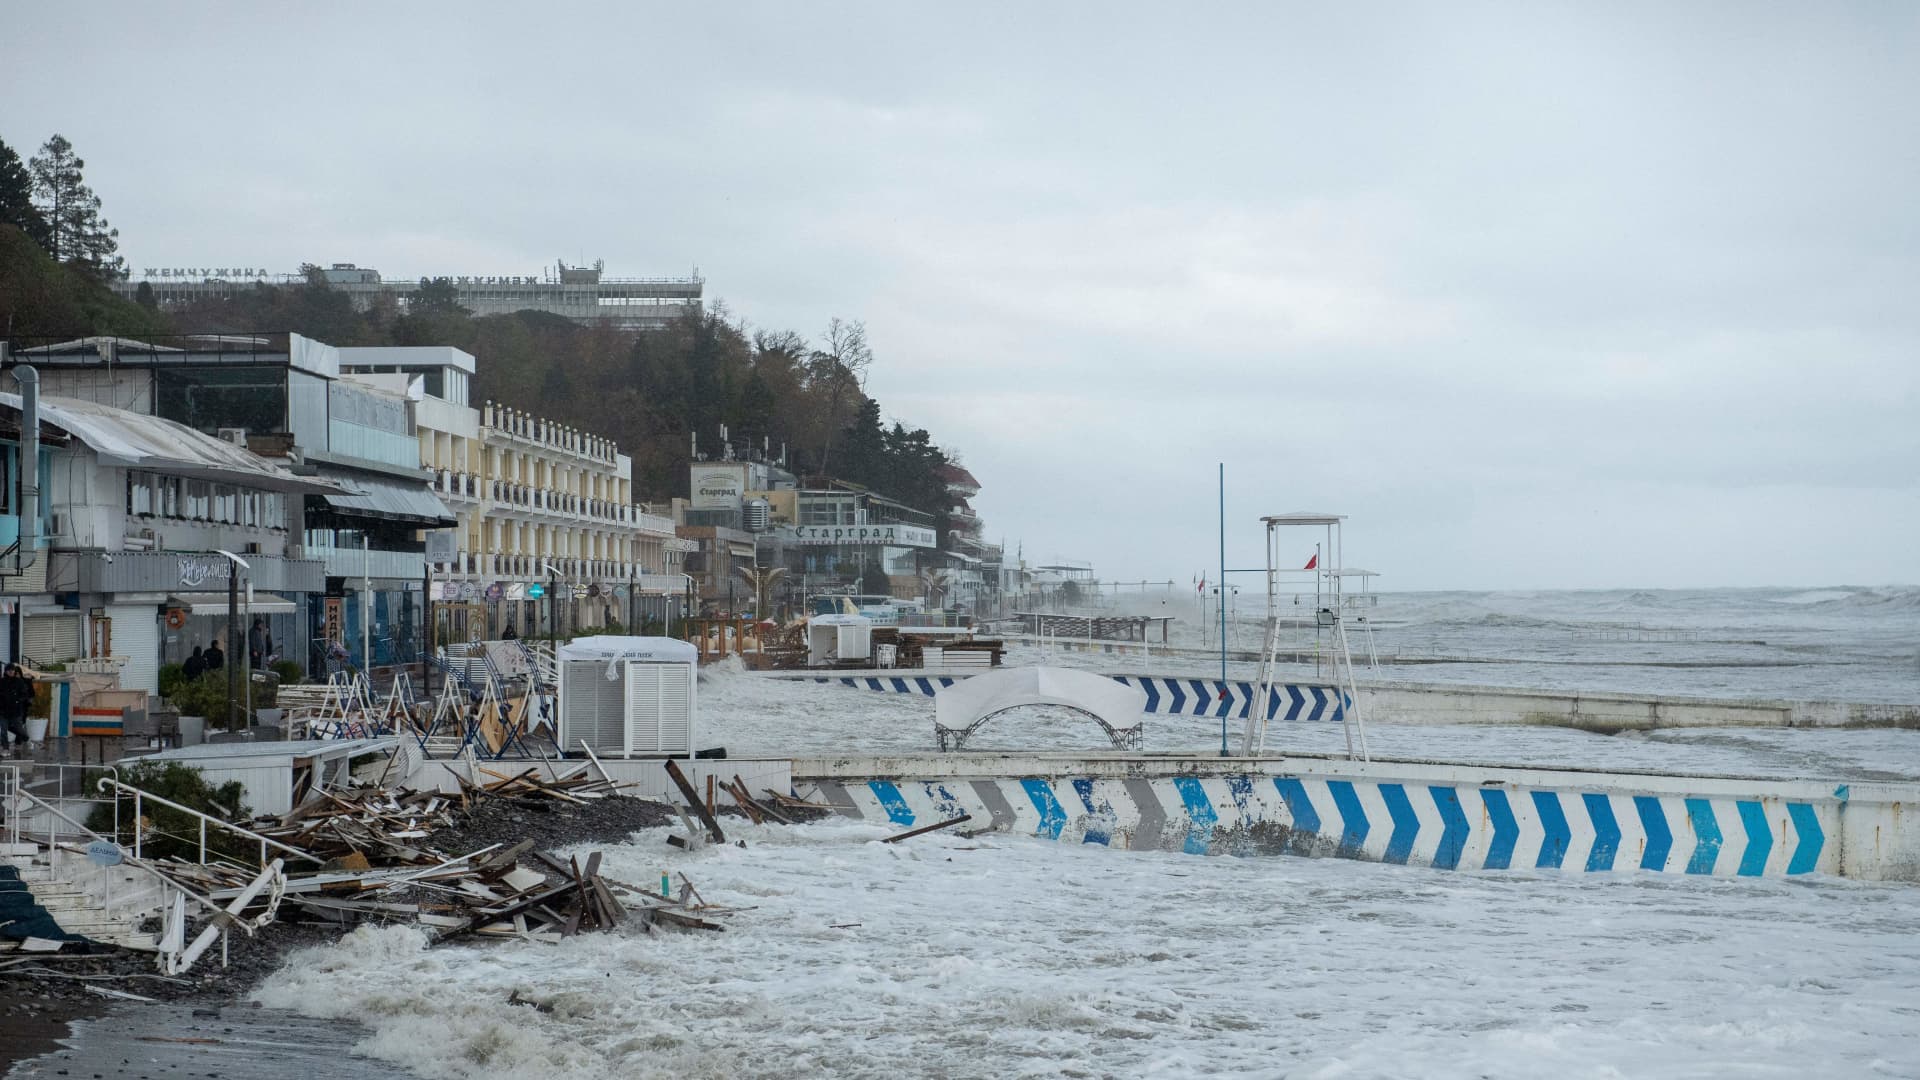 Waves crash against a seafront in the Black Sea resort city of Sochi during a storm on November 27, 2023. (Photo by Mikhail Mordasov / AFP) (Photo by MIKHAIL MORDASOV/AFP via Getty Images)